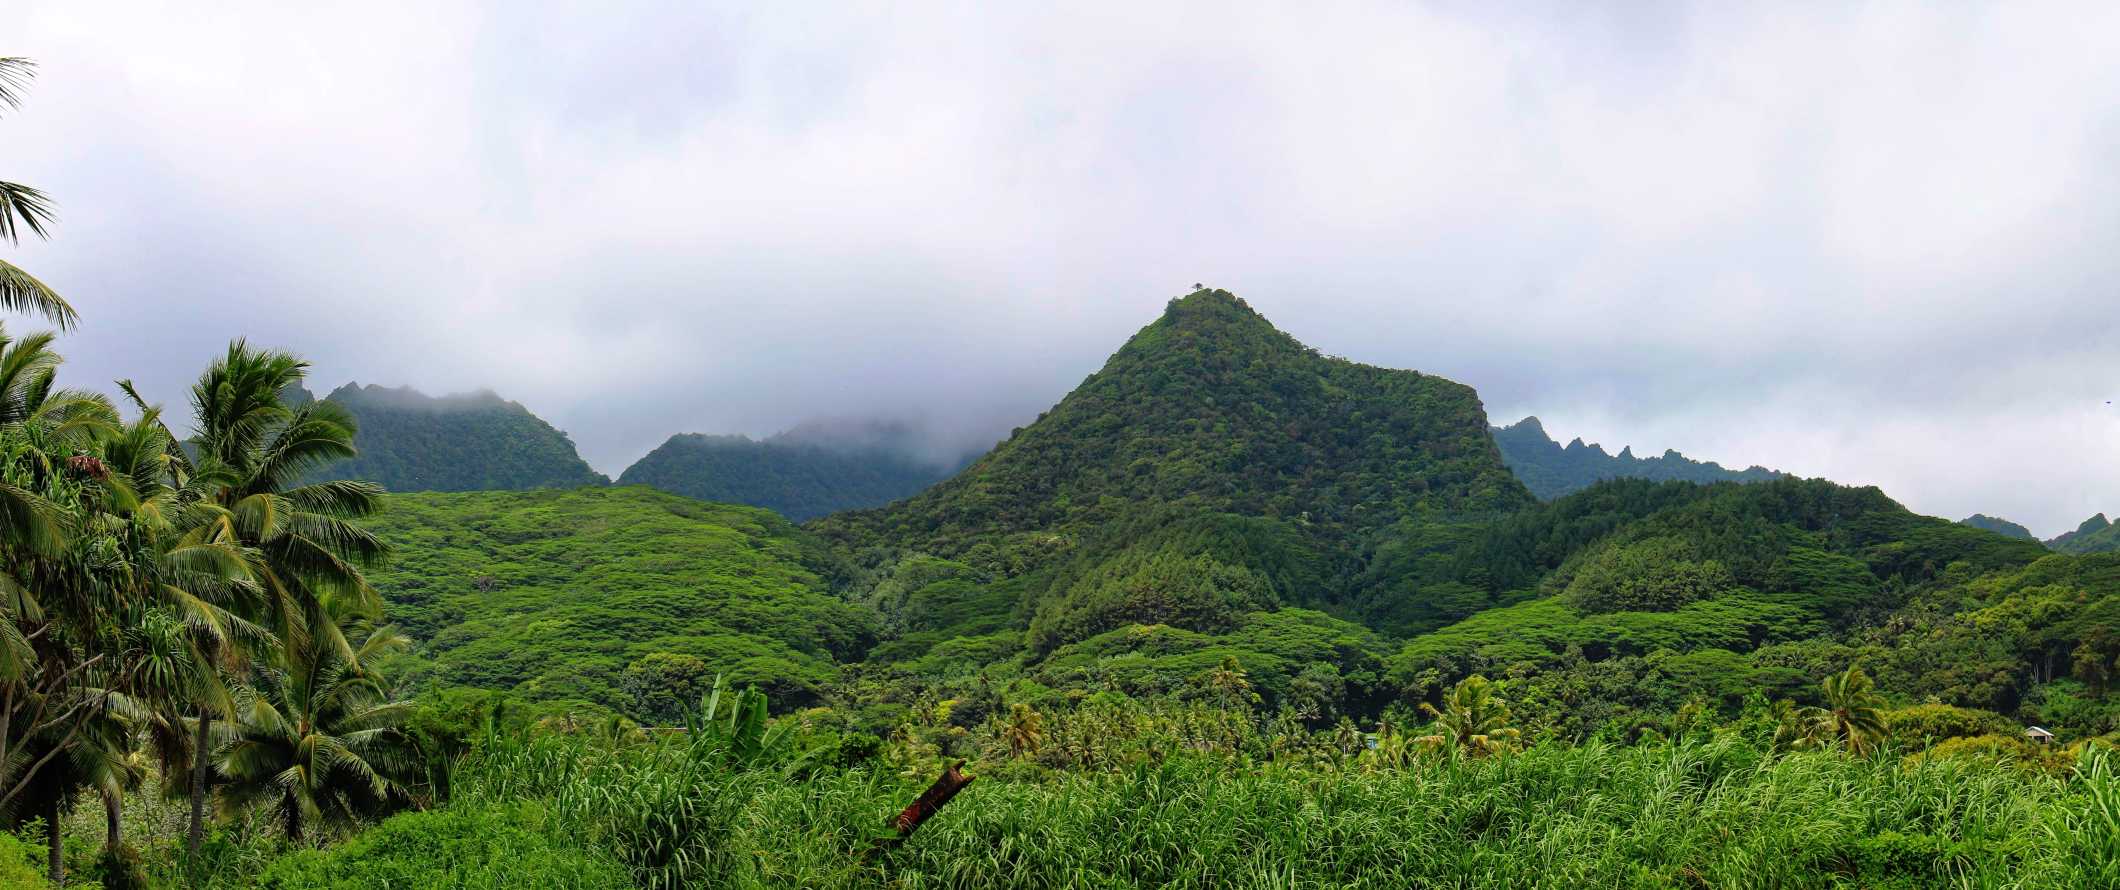 The lush forested mountains of the island of Rarotonga in the Cook Islands